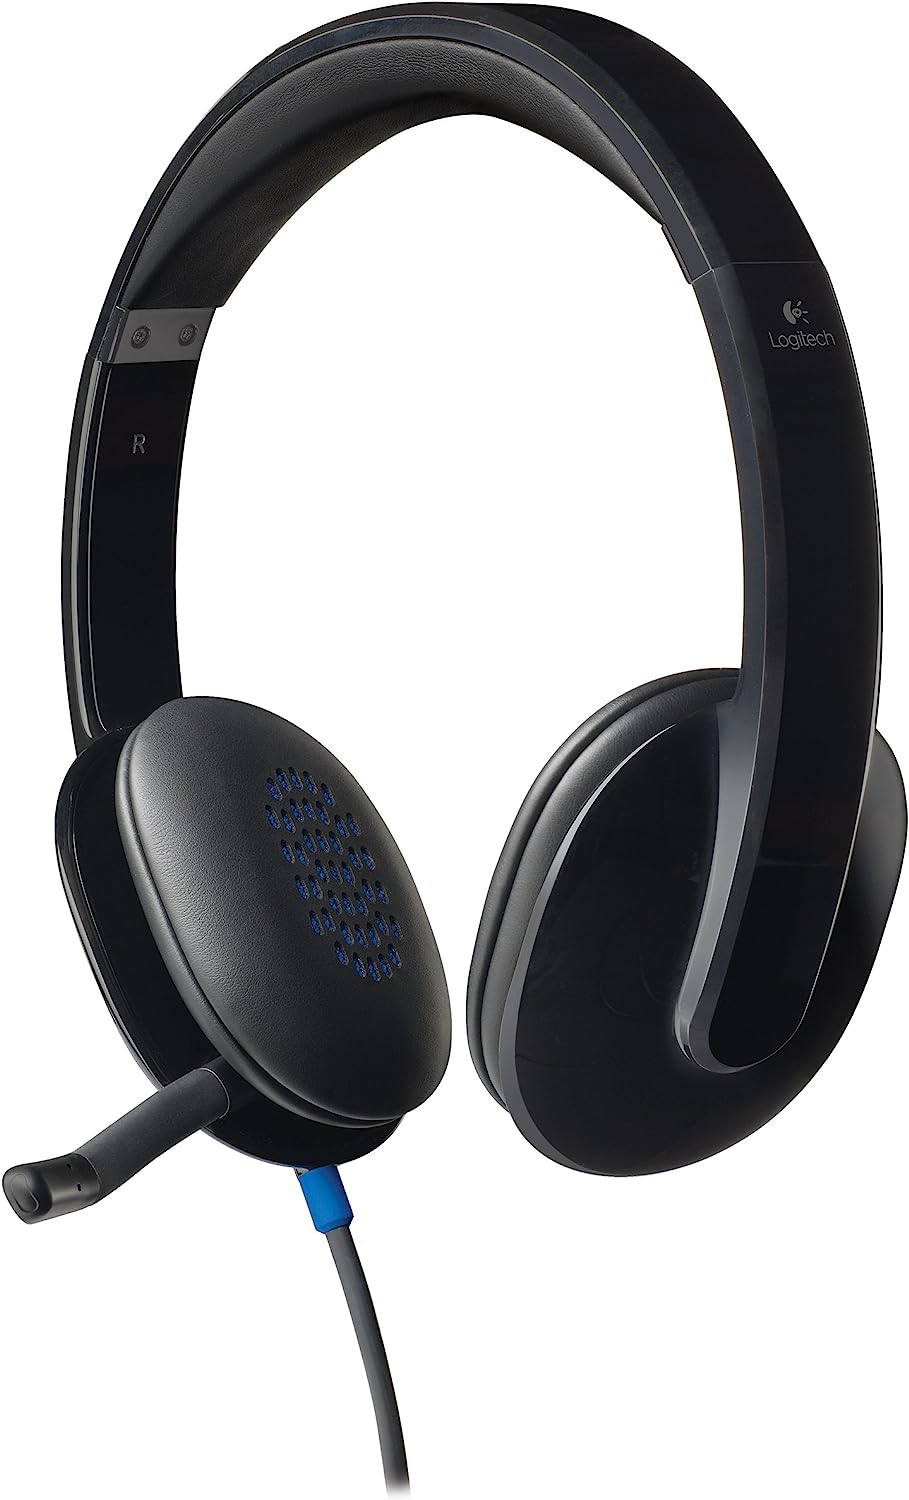 Logitech On-Ear Wired Headphones with Microphone, Black - H540